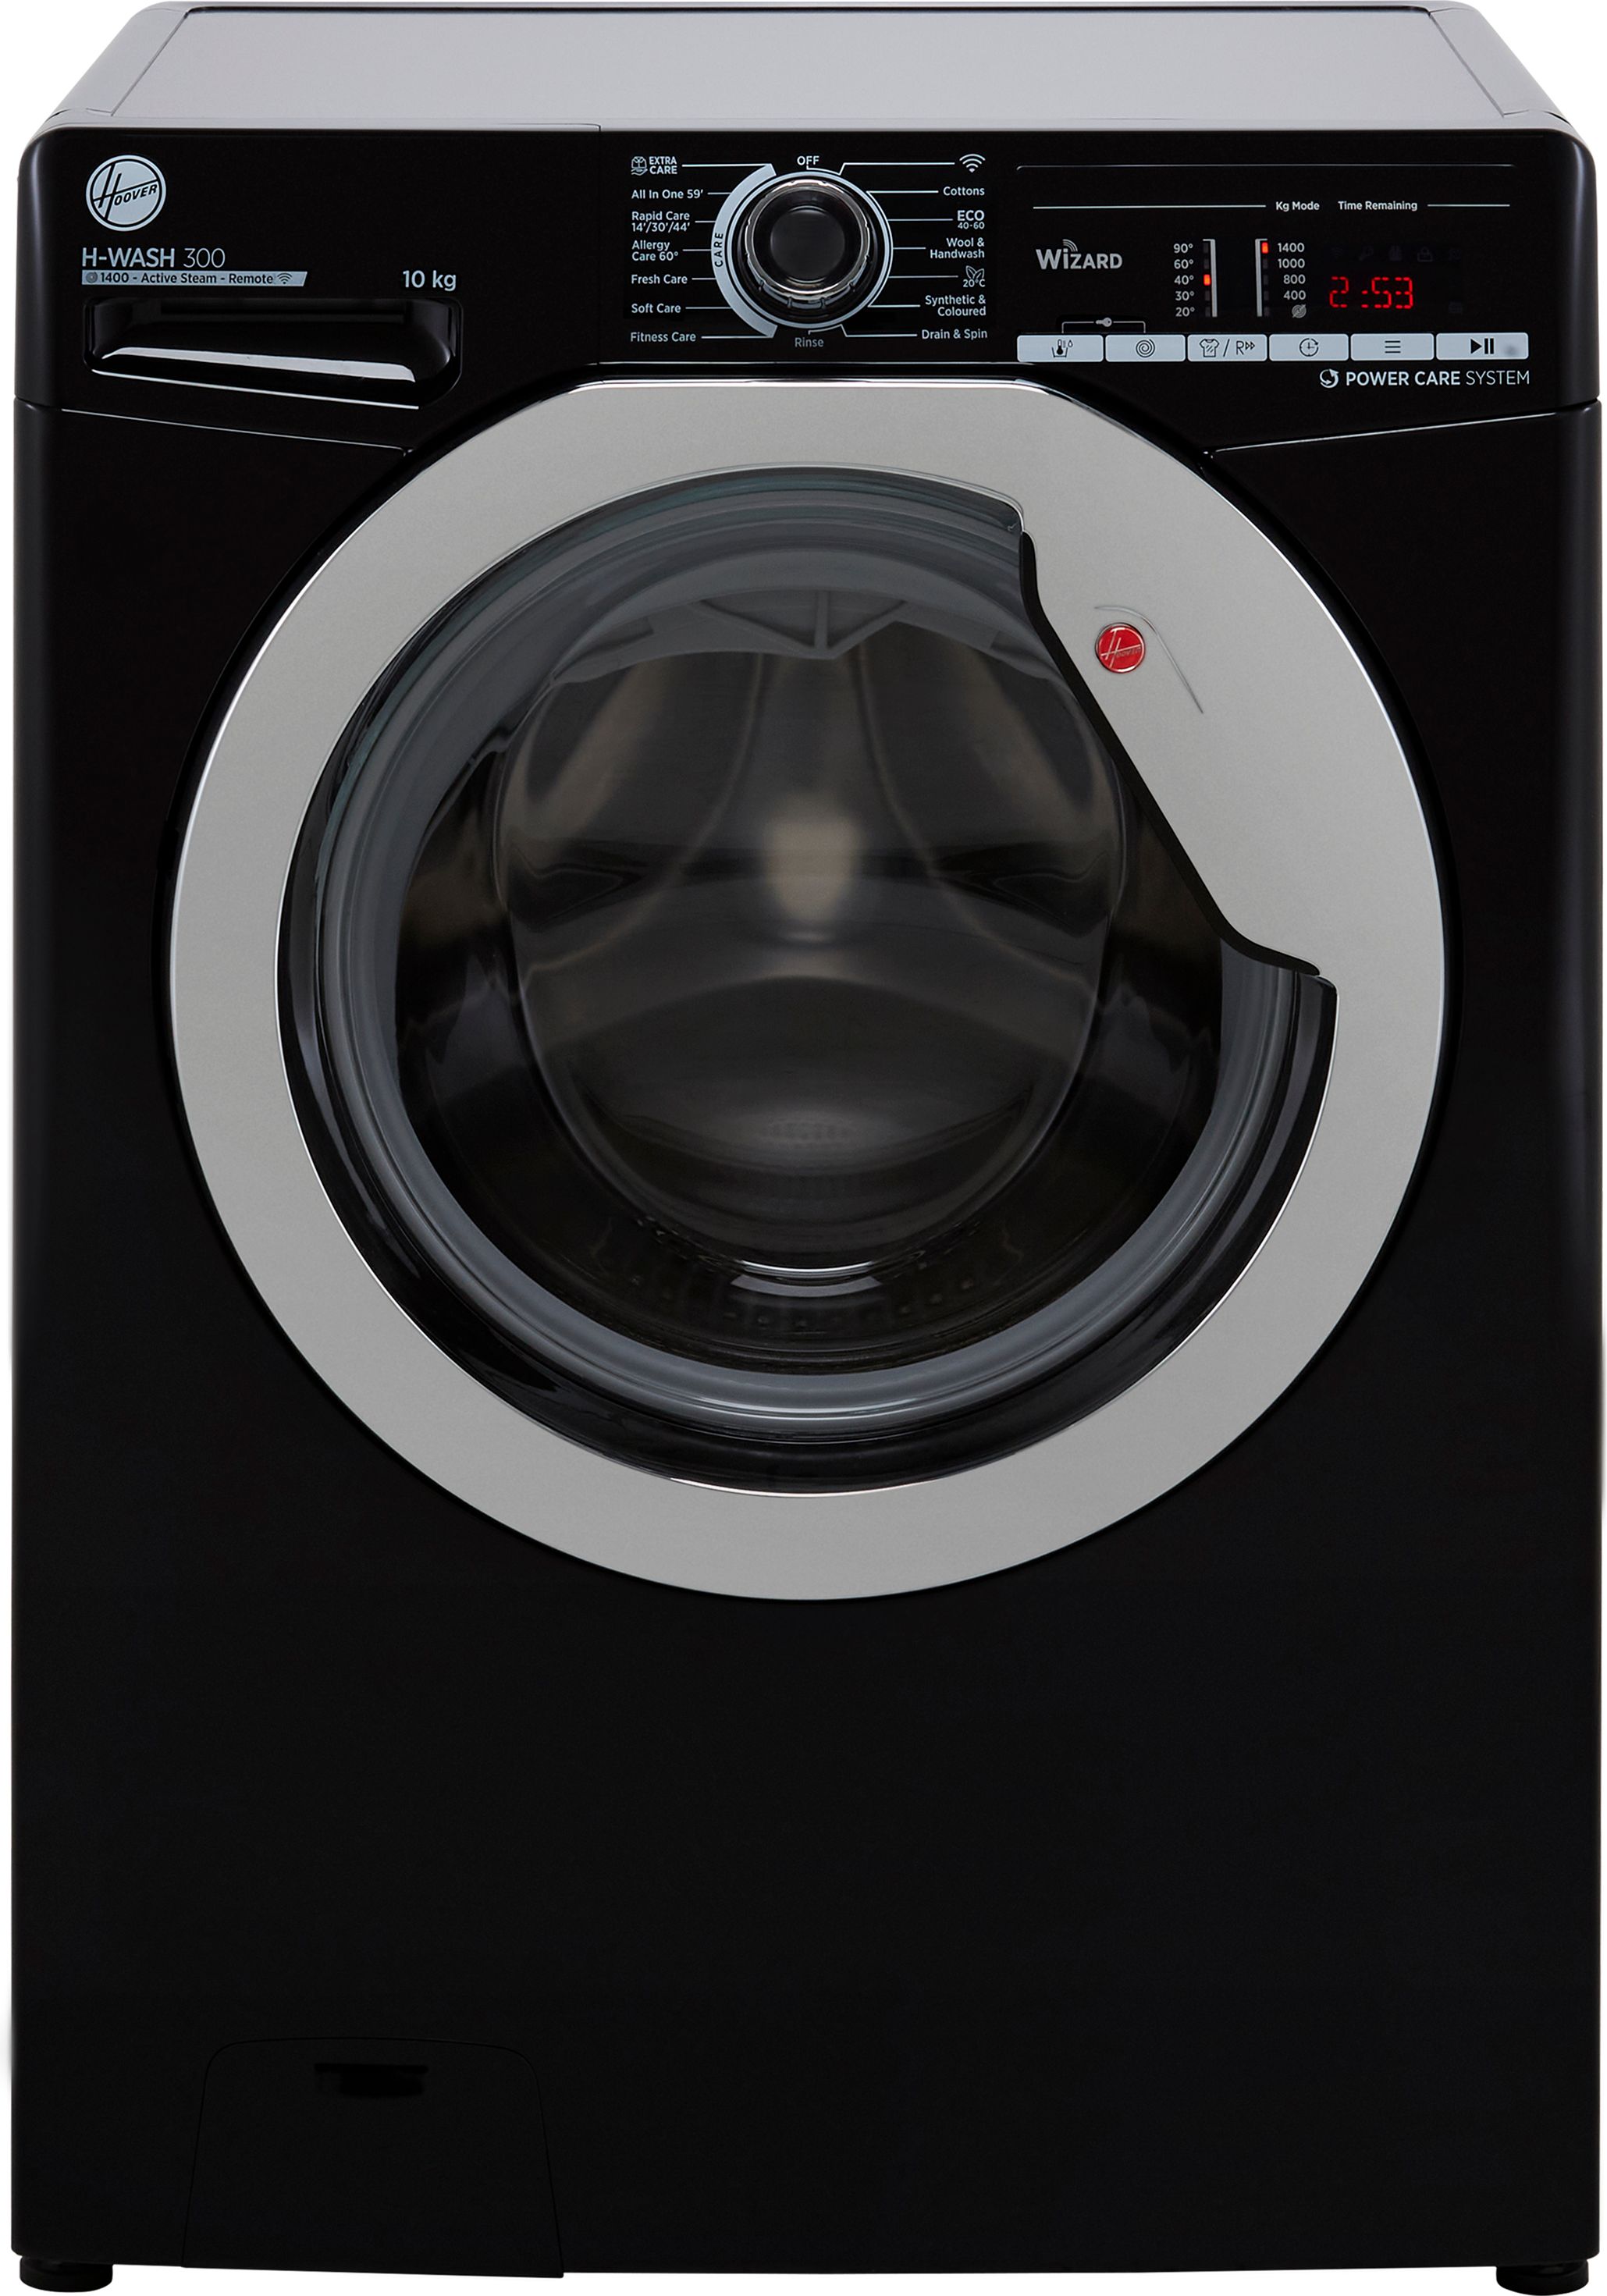 Hoover H-WASH 300 LITE H3WS4105TACBE 10kg Washing Machine with 1400 rpm - Black - C Rated, Black